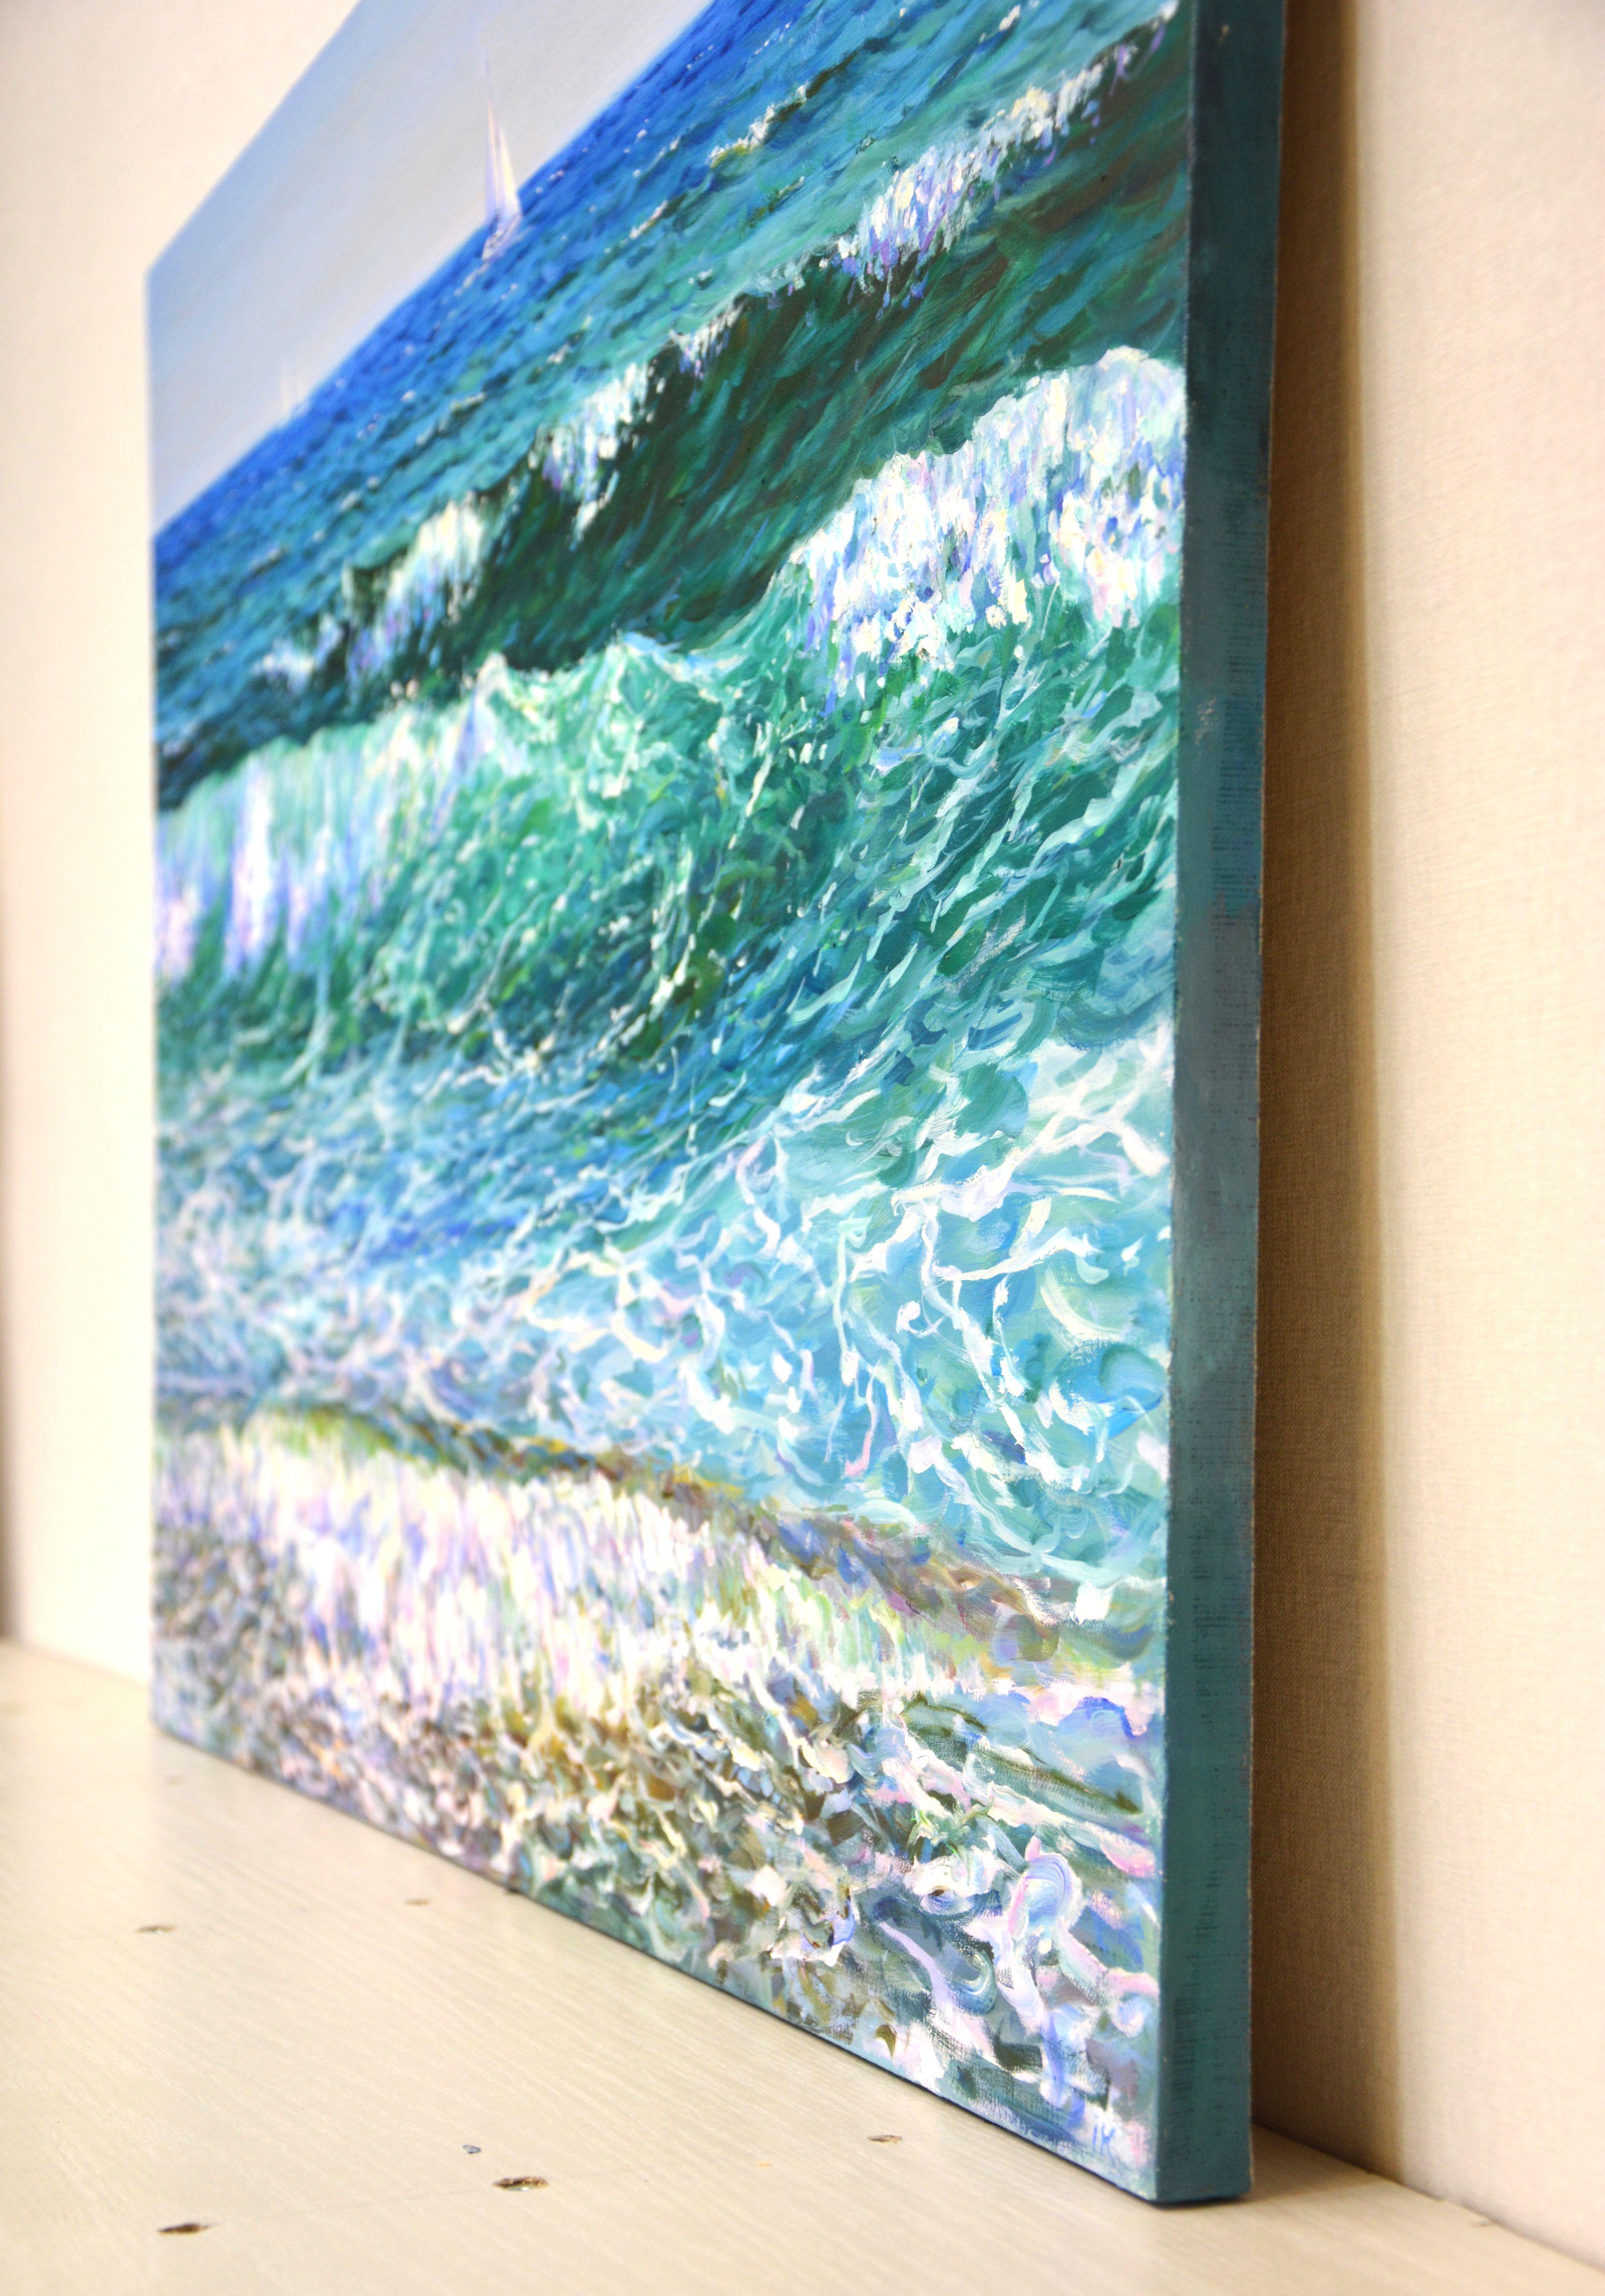 Sea. The waves., Painting, Oil on Canvas 2